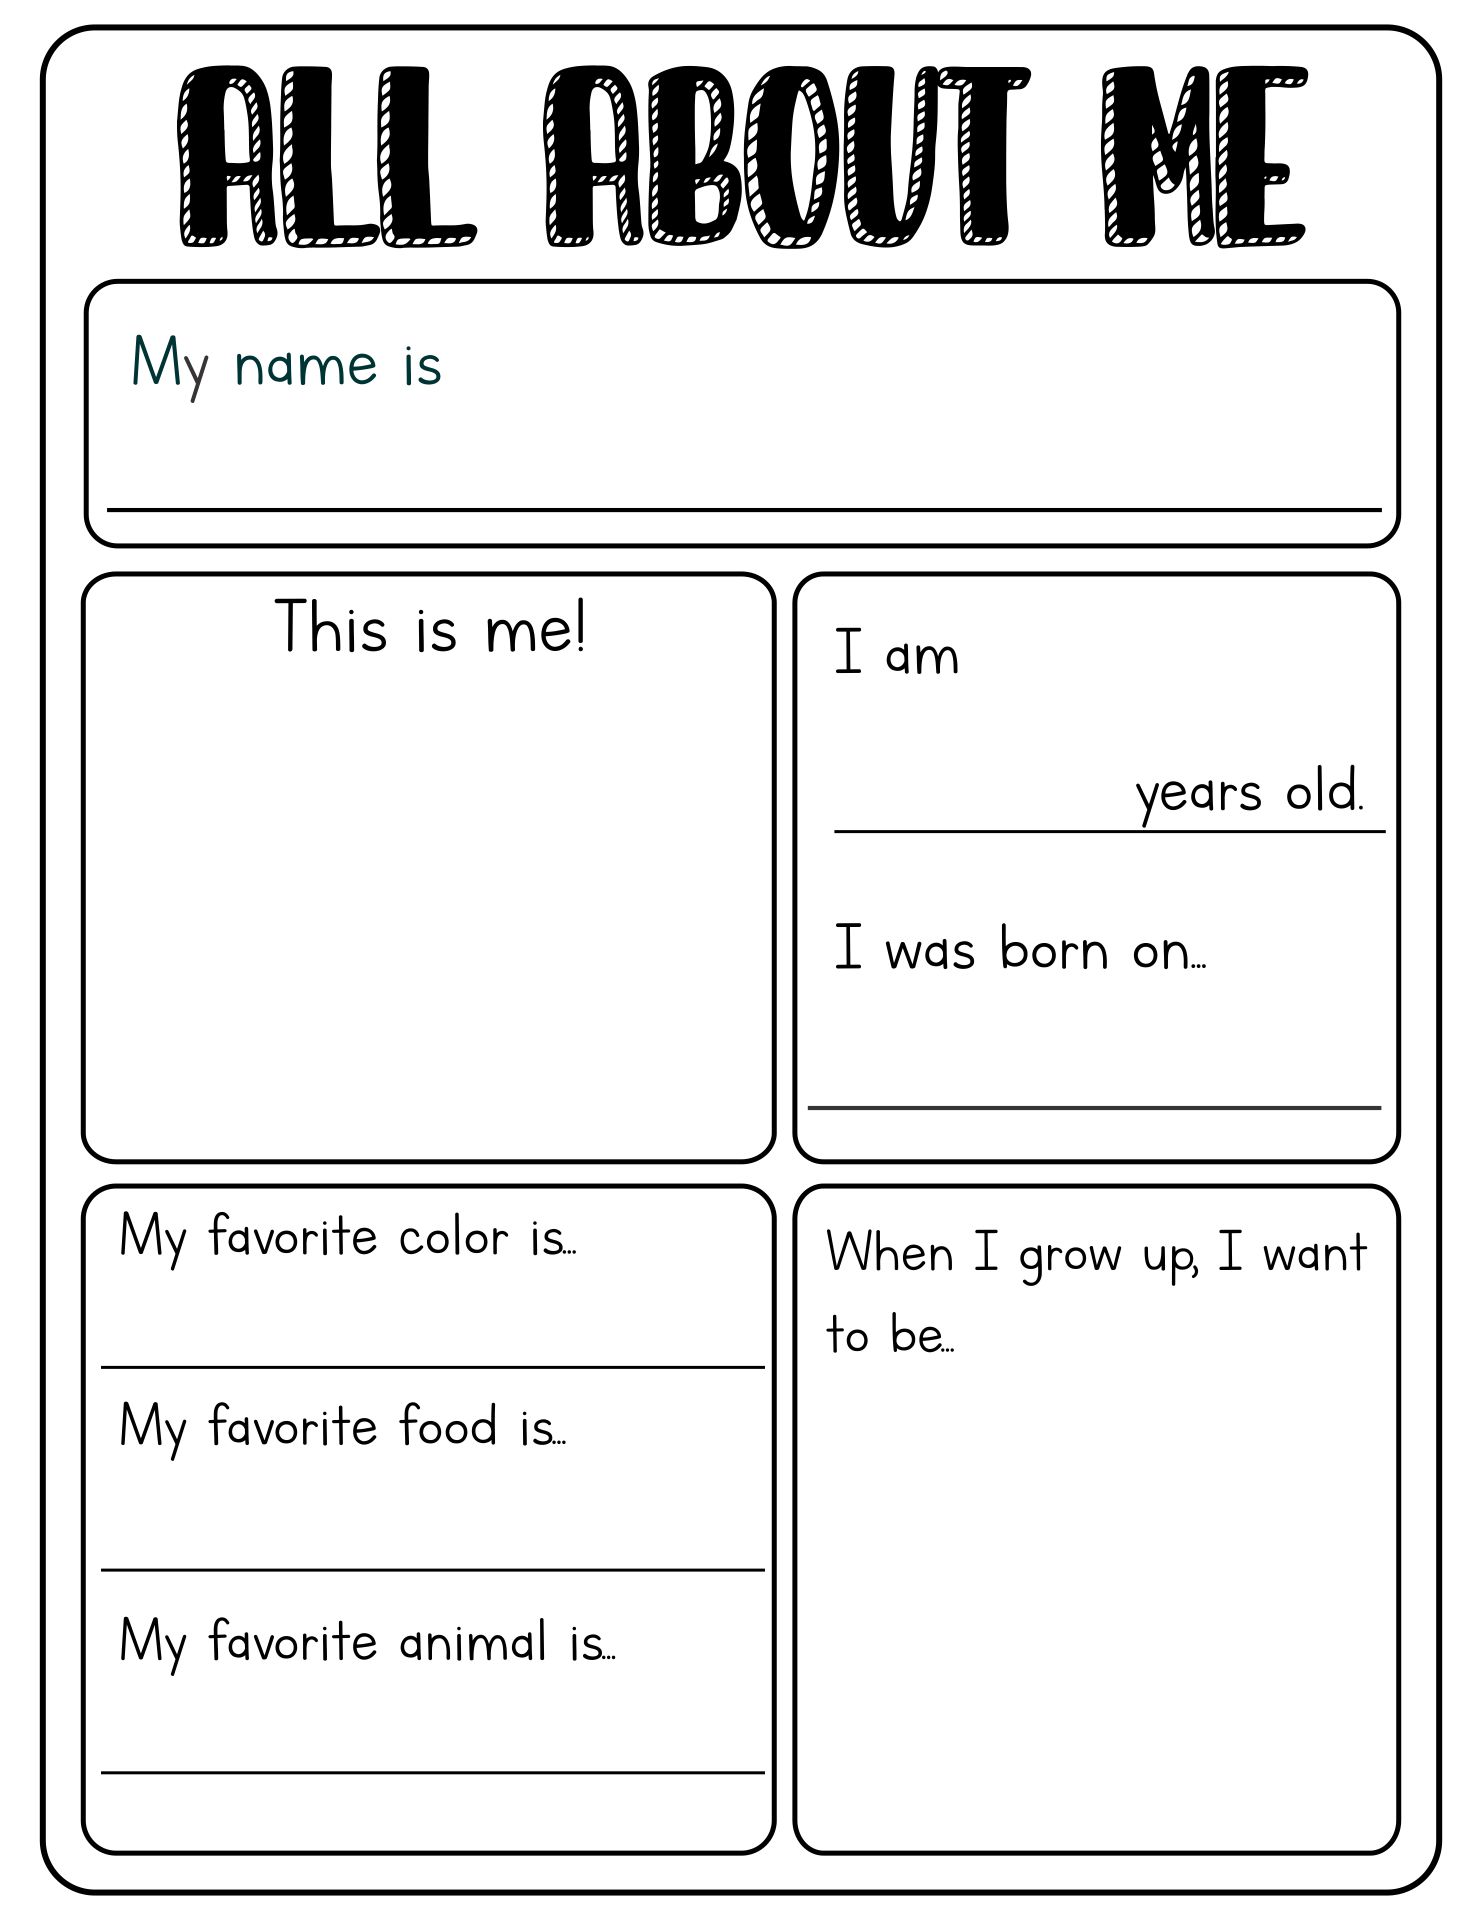 all-about-me-worksheet-free-printable